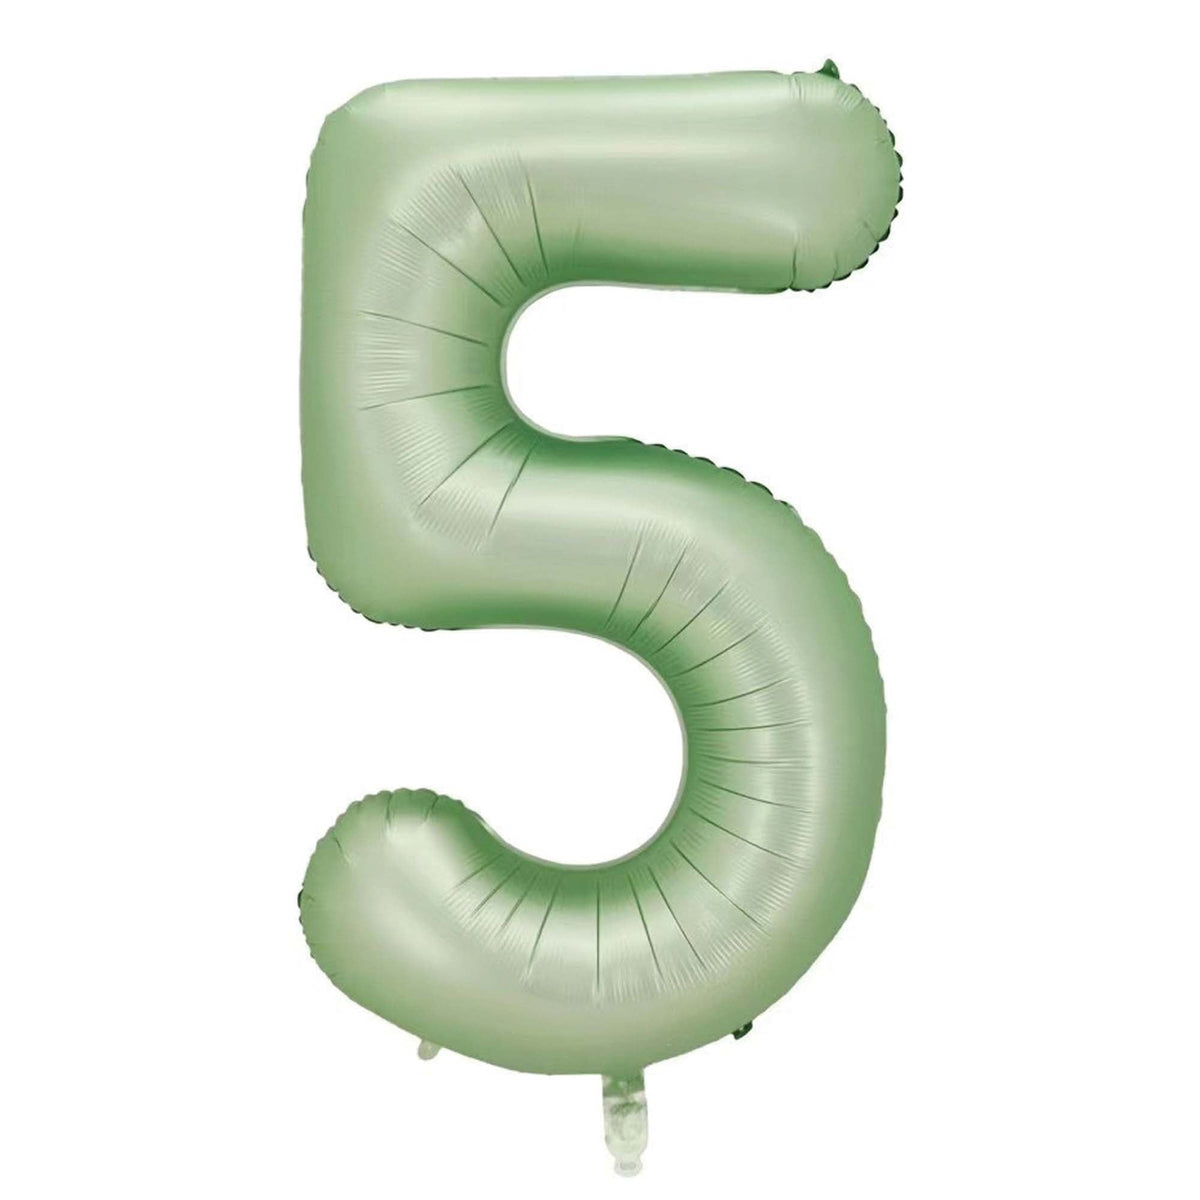 BOOMBA INTERNATIONAL TRADING CO,. LTD Balloons Eucalyptus Matte Green Number 5 Supershape Foil Balloon, 40 Inches, 1 Count 810077659892